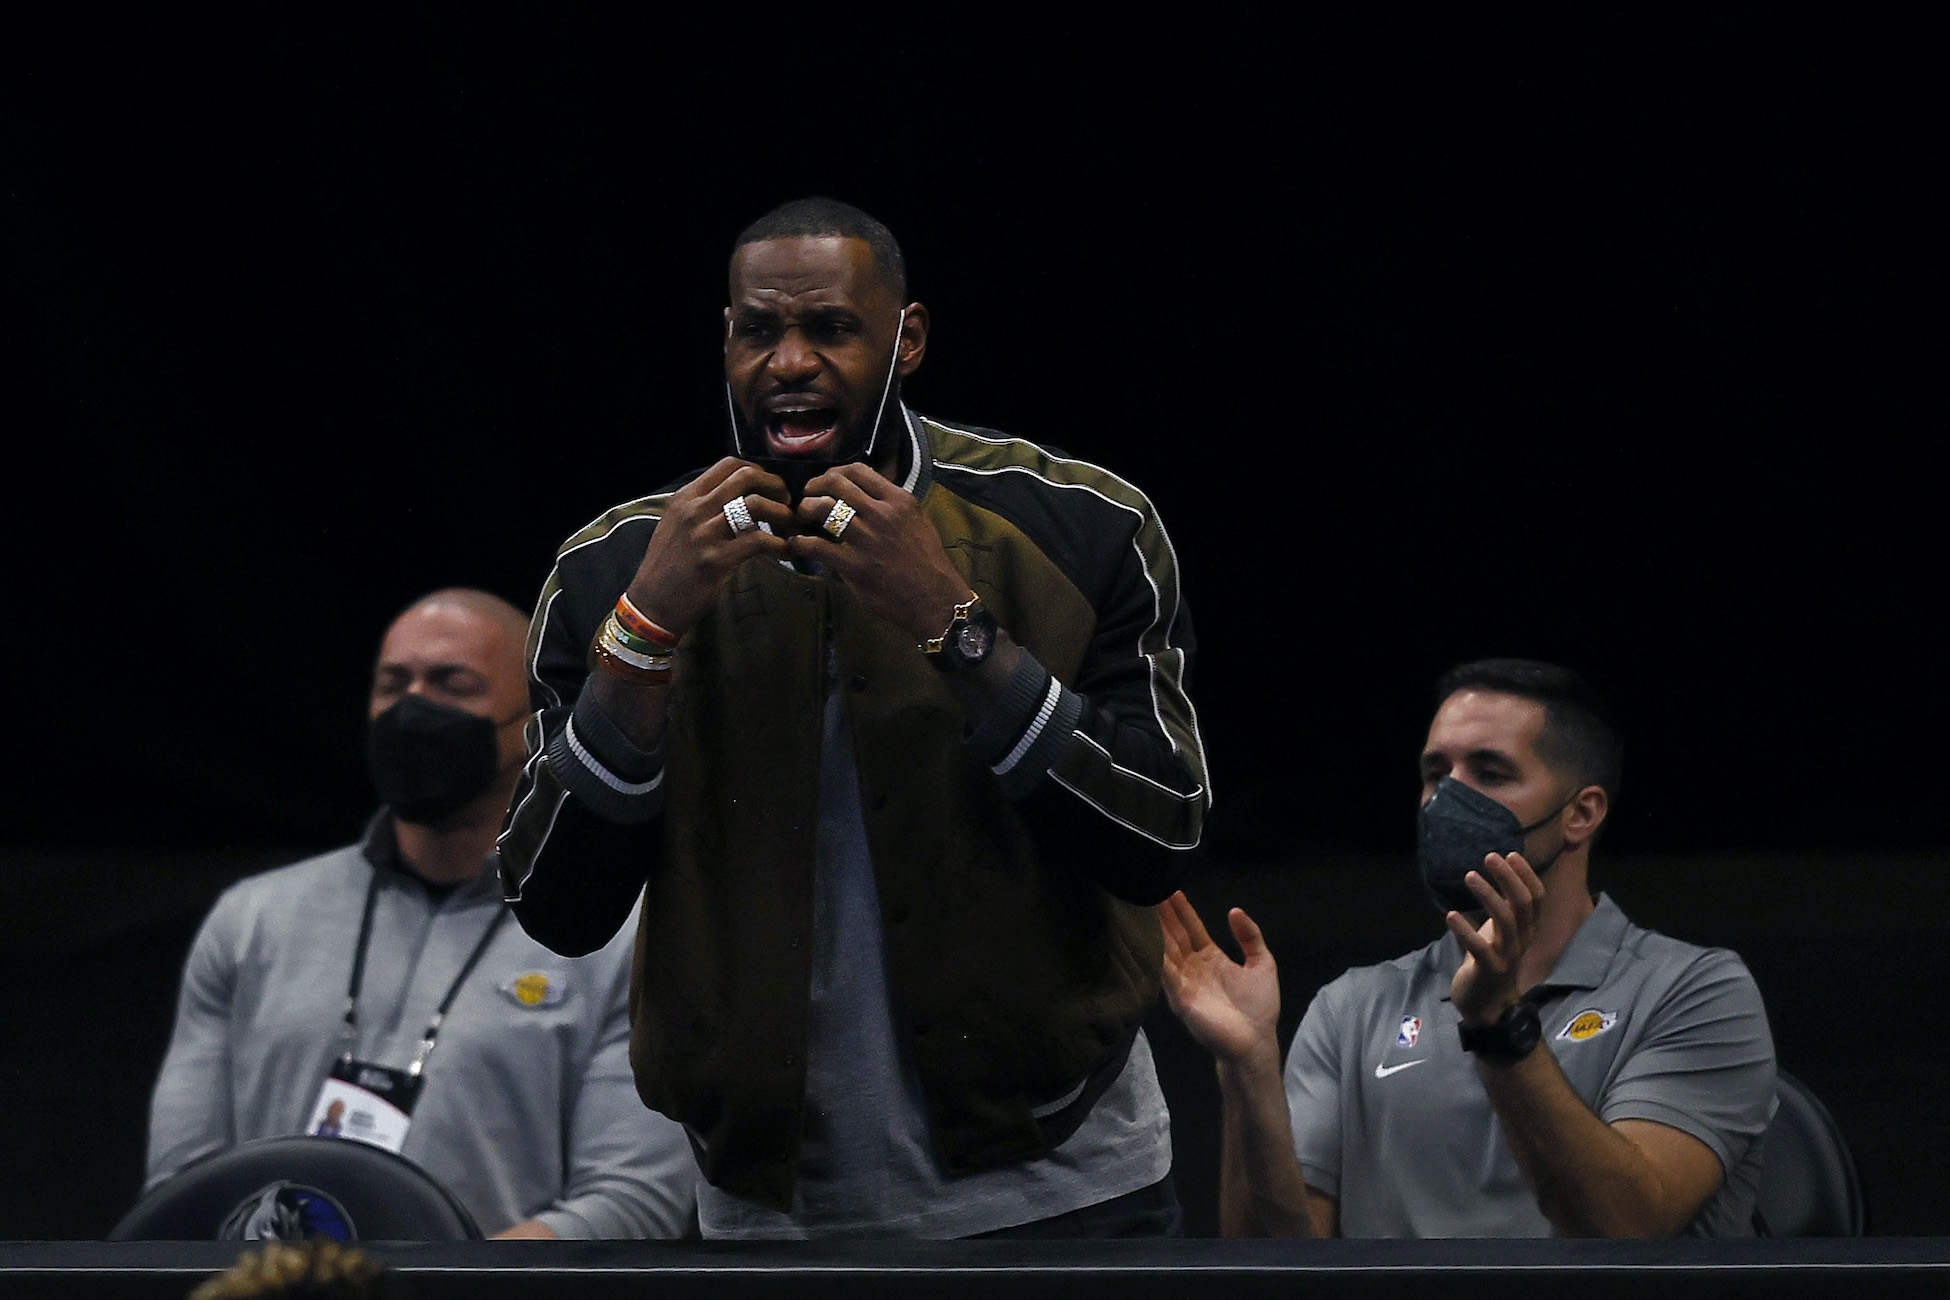 LeBron James reacts during a LA Lakers game while sidelined with an ankle injury.